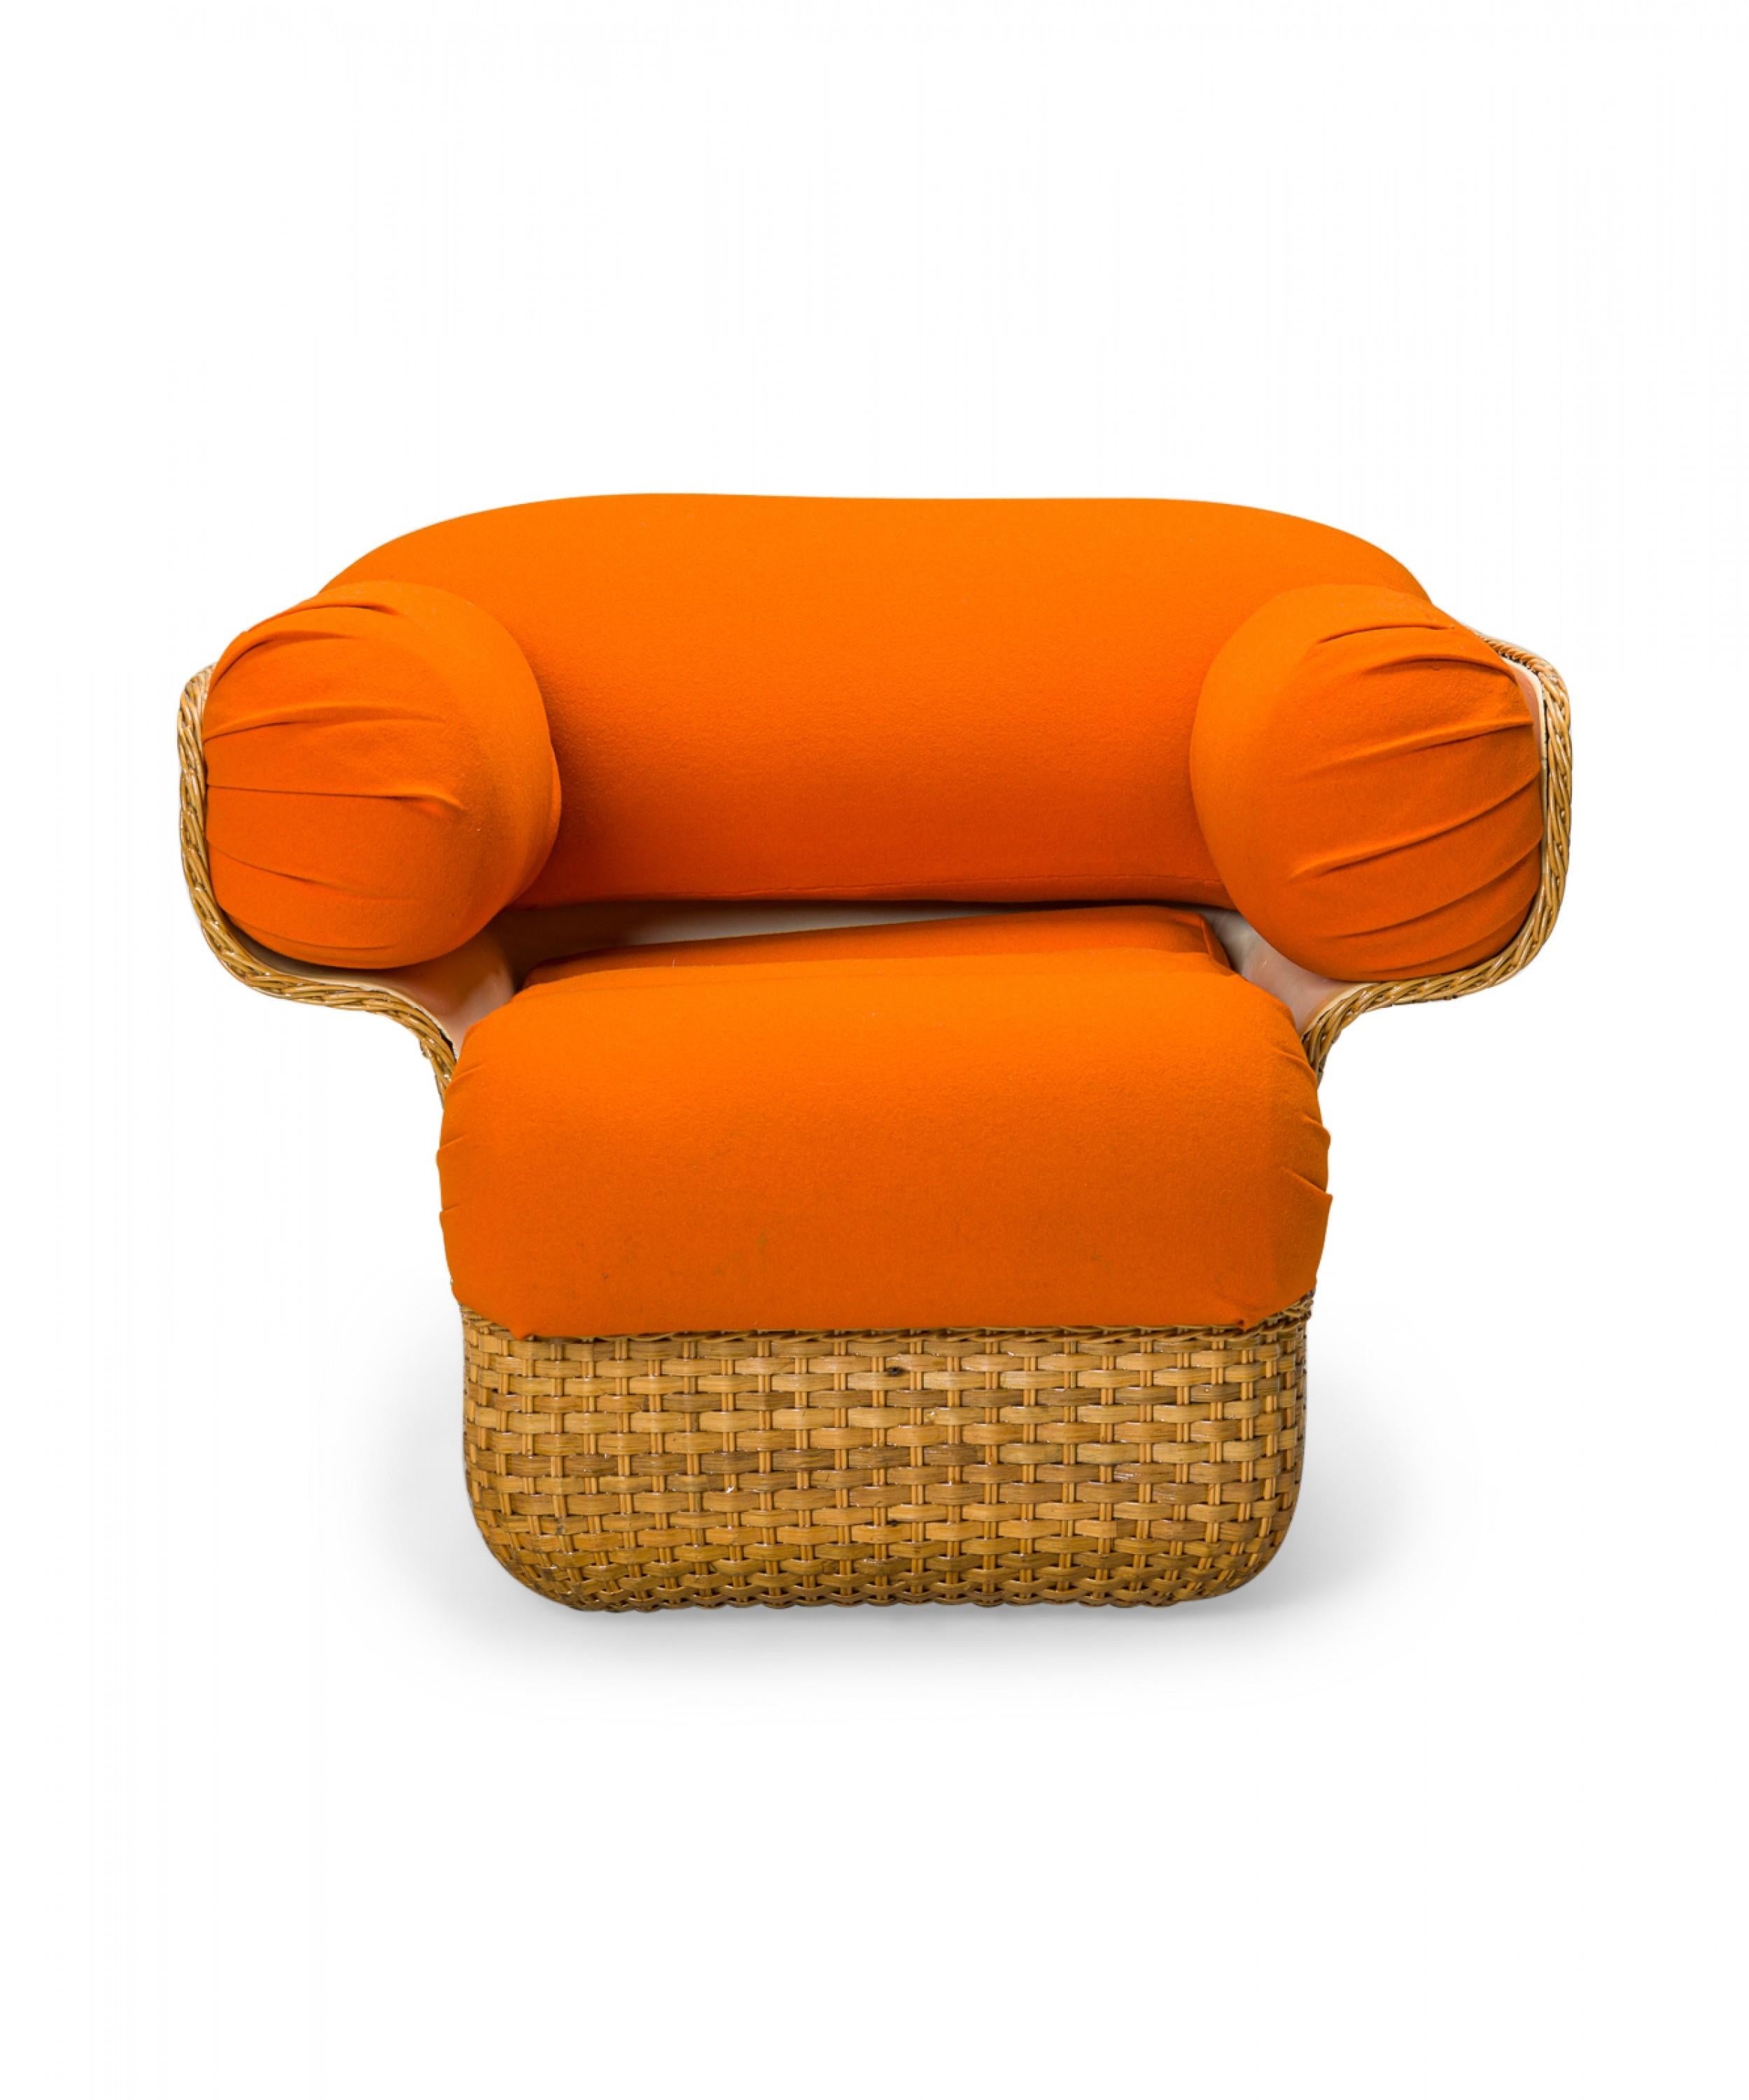 Italian mid-century lounge / armchair with a small woven wicker form with large cylindrical bright orange cushions, resting on a wicker pedestal base. (Joe Colombo).